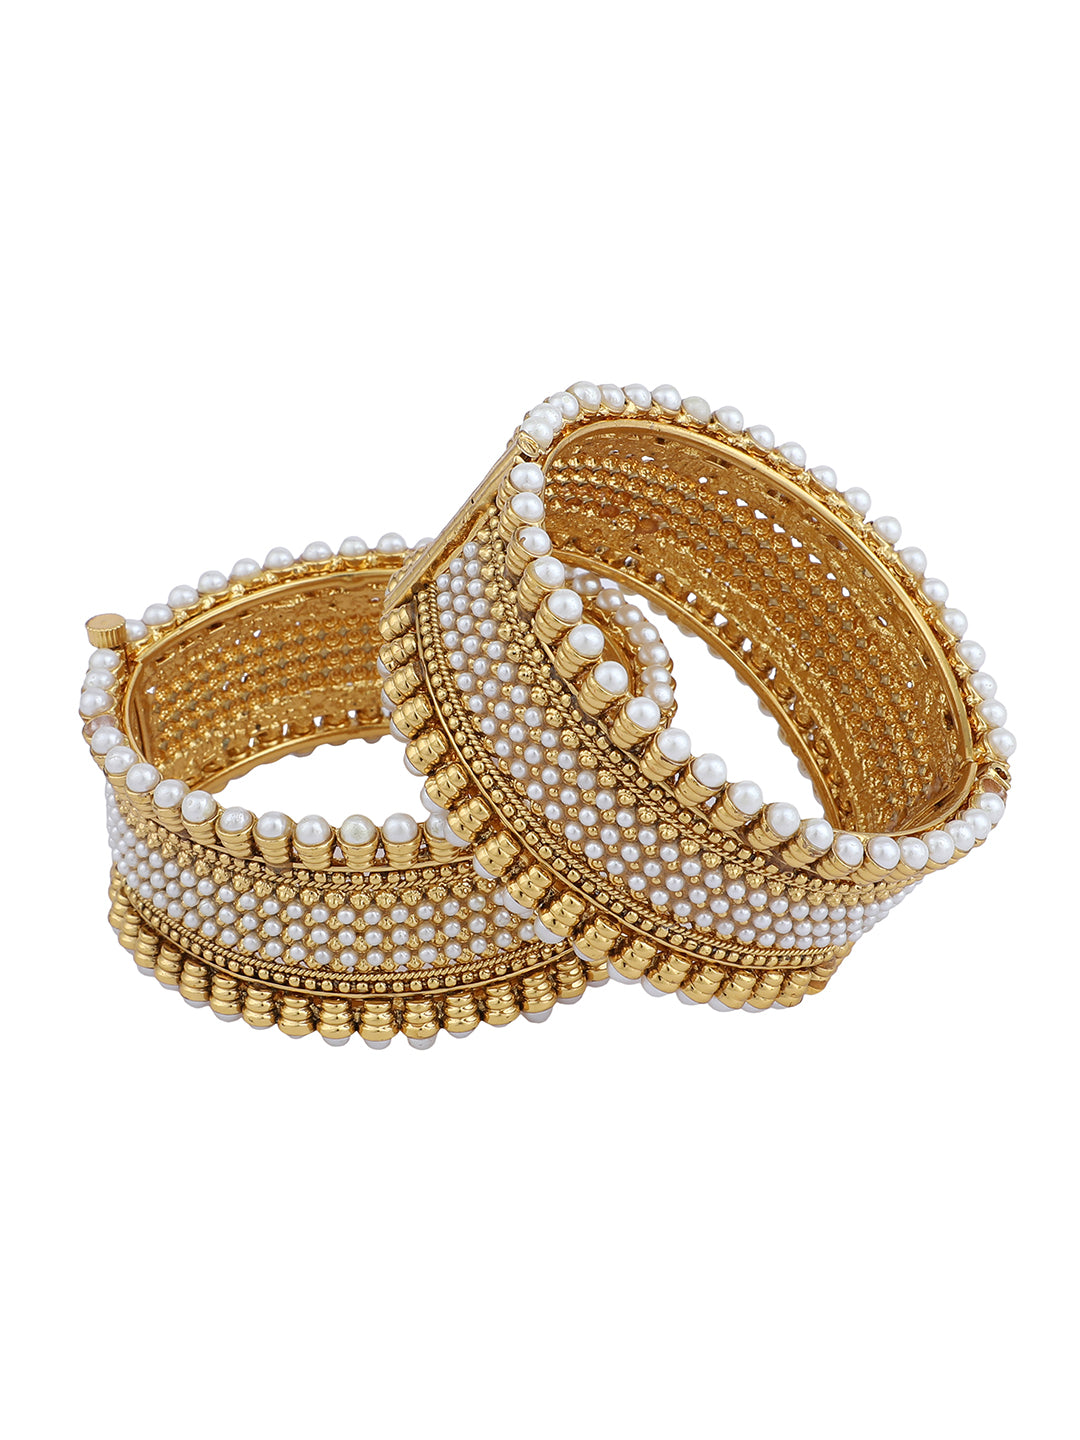 Women's Set Of 2 Gold-Plated Handcrafted Pearl Studded Bangles - Anikas Creation